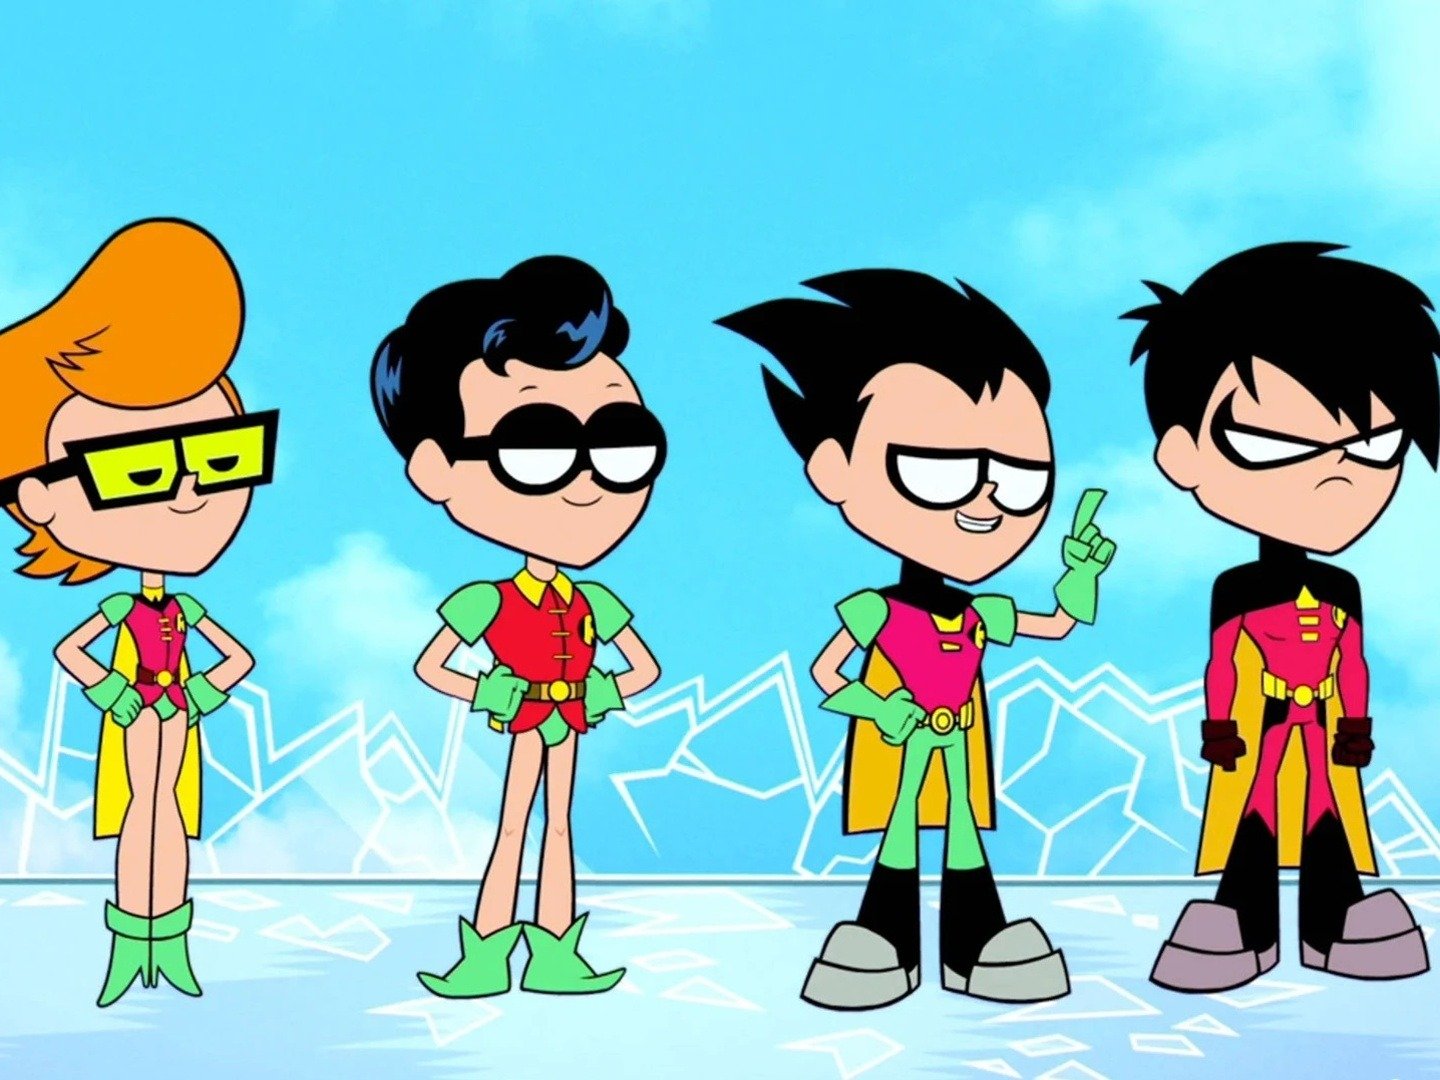 Teen Titans Go! on TV | Channels and schedules | TV24.co.uk